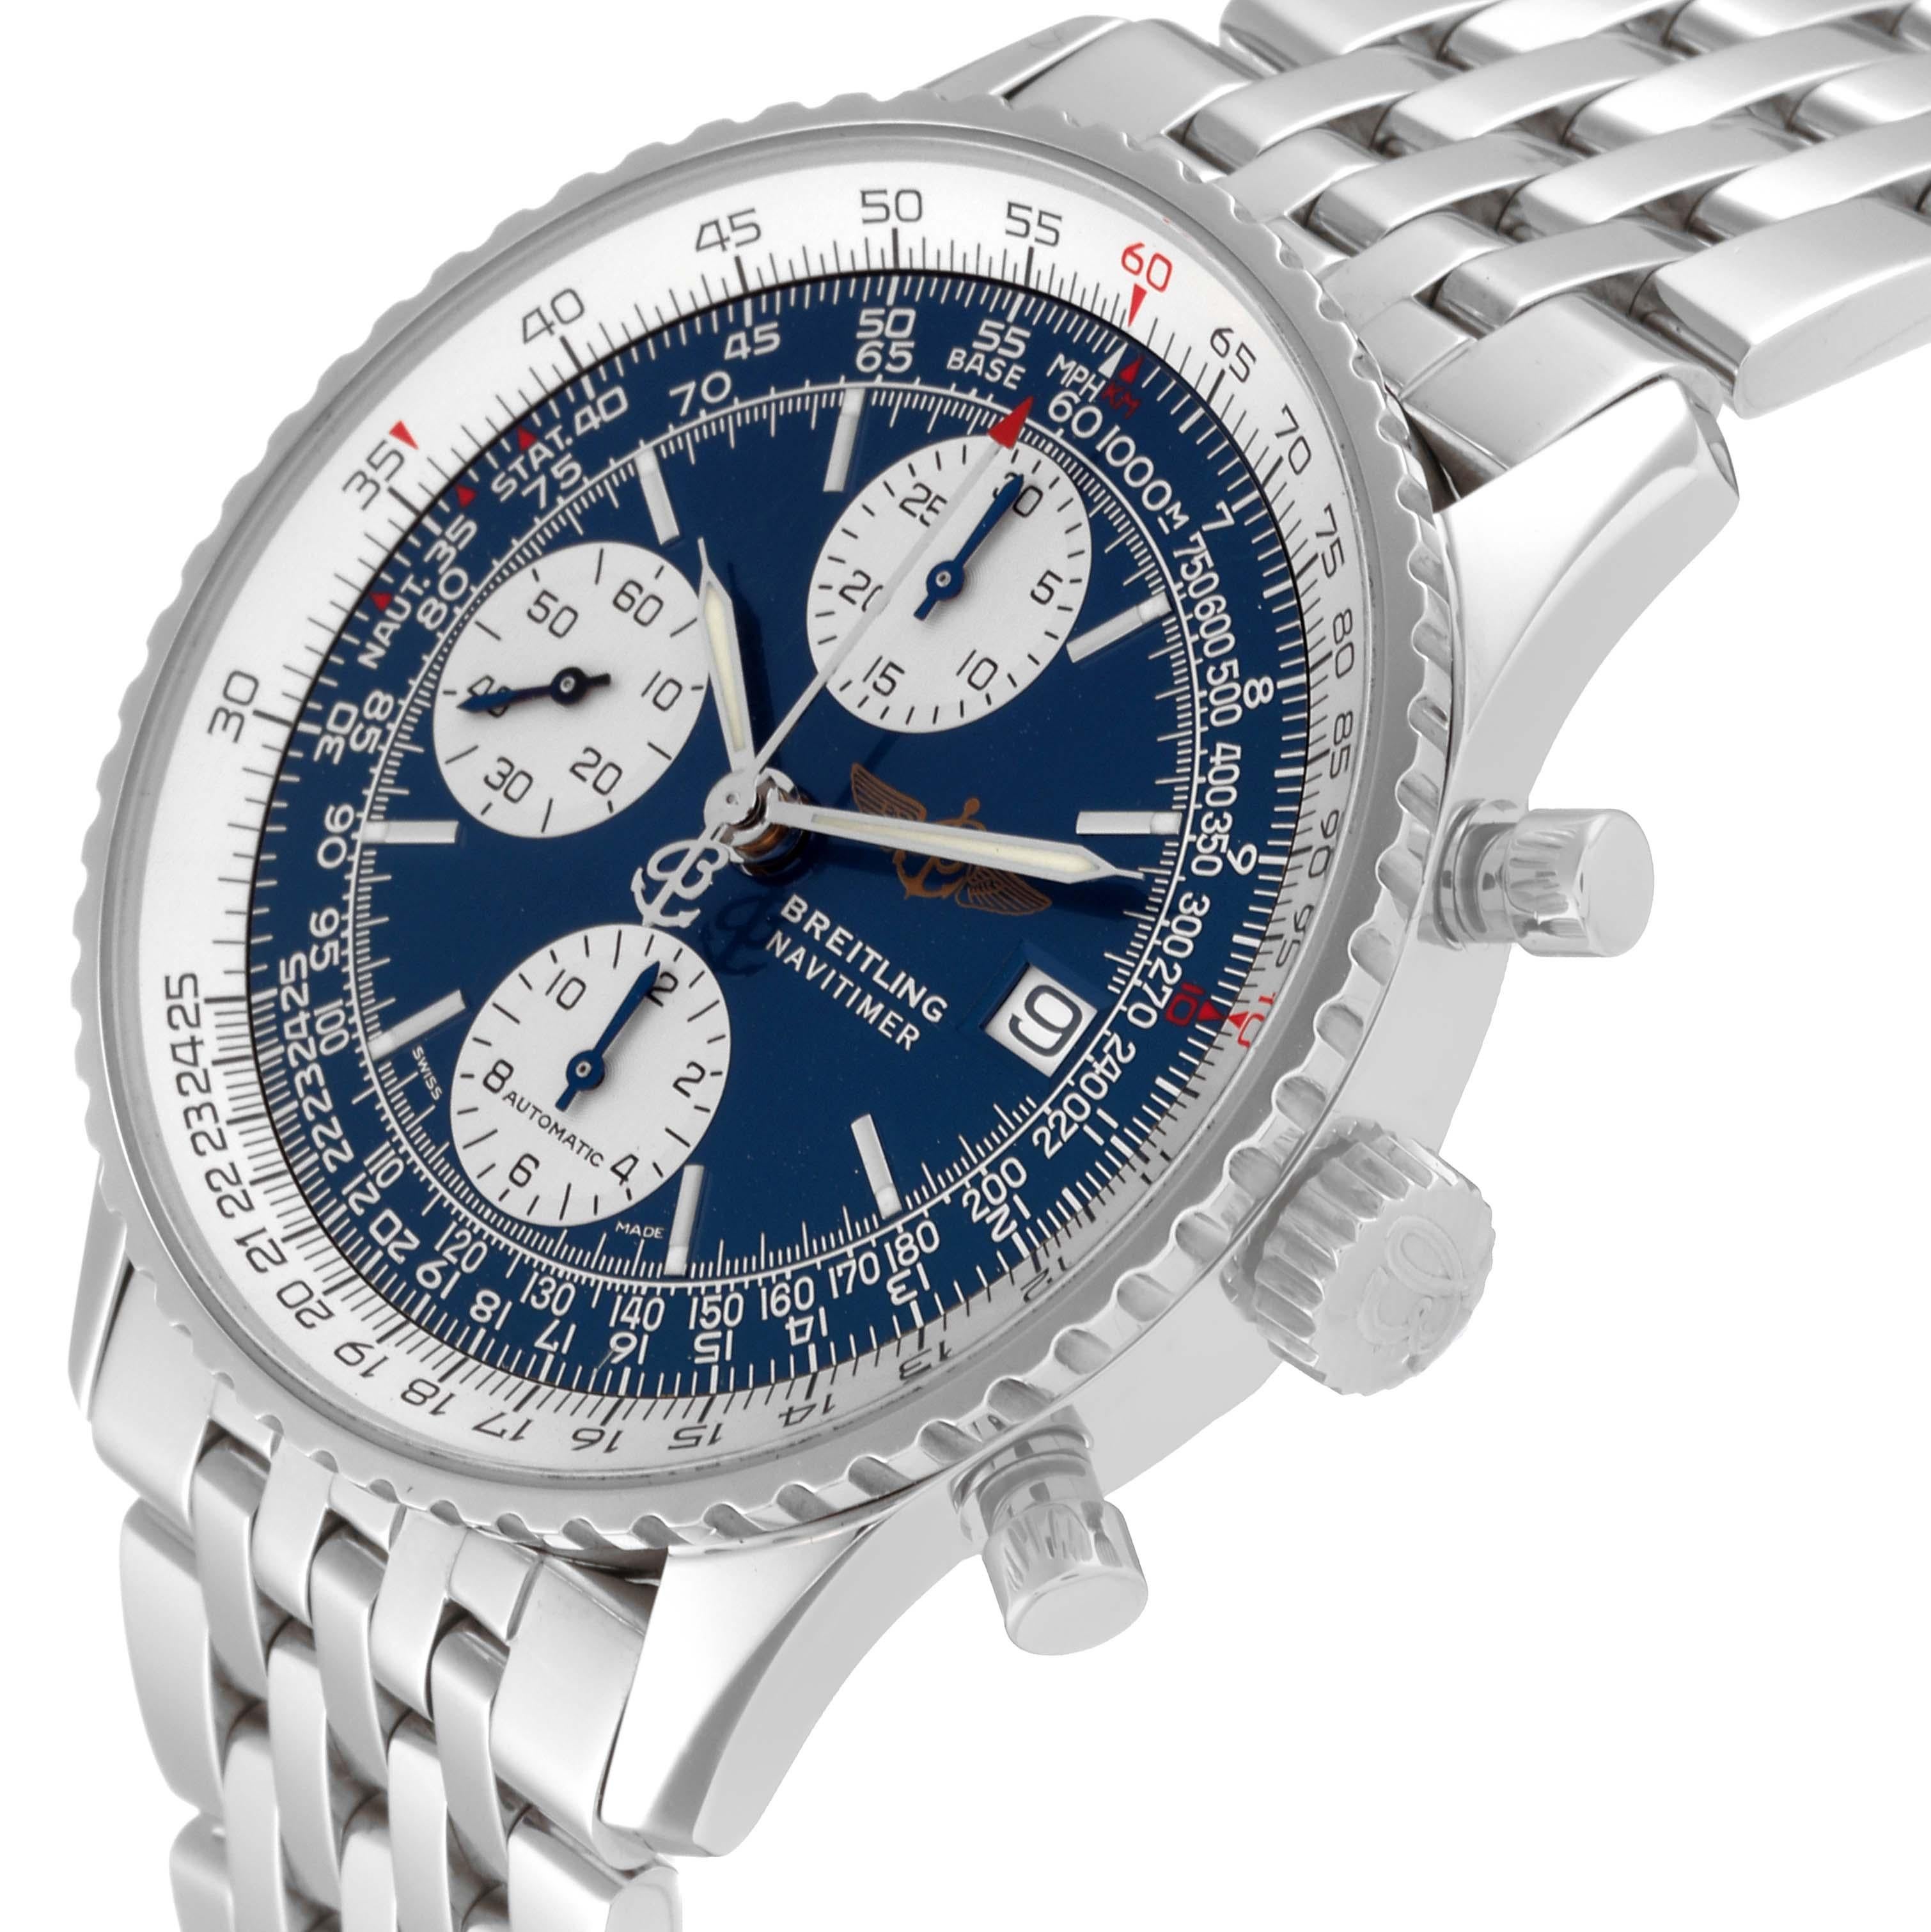 Men's Breitling Navitimer II Blue Dial Chronograph Steel Mens Watch A13322 Box Papers